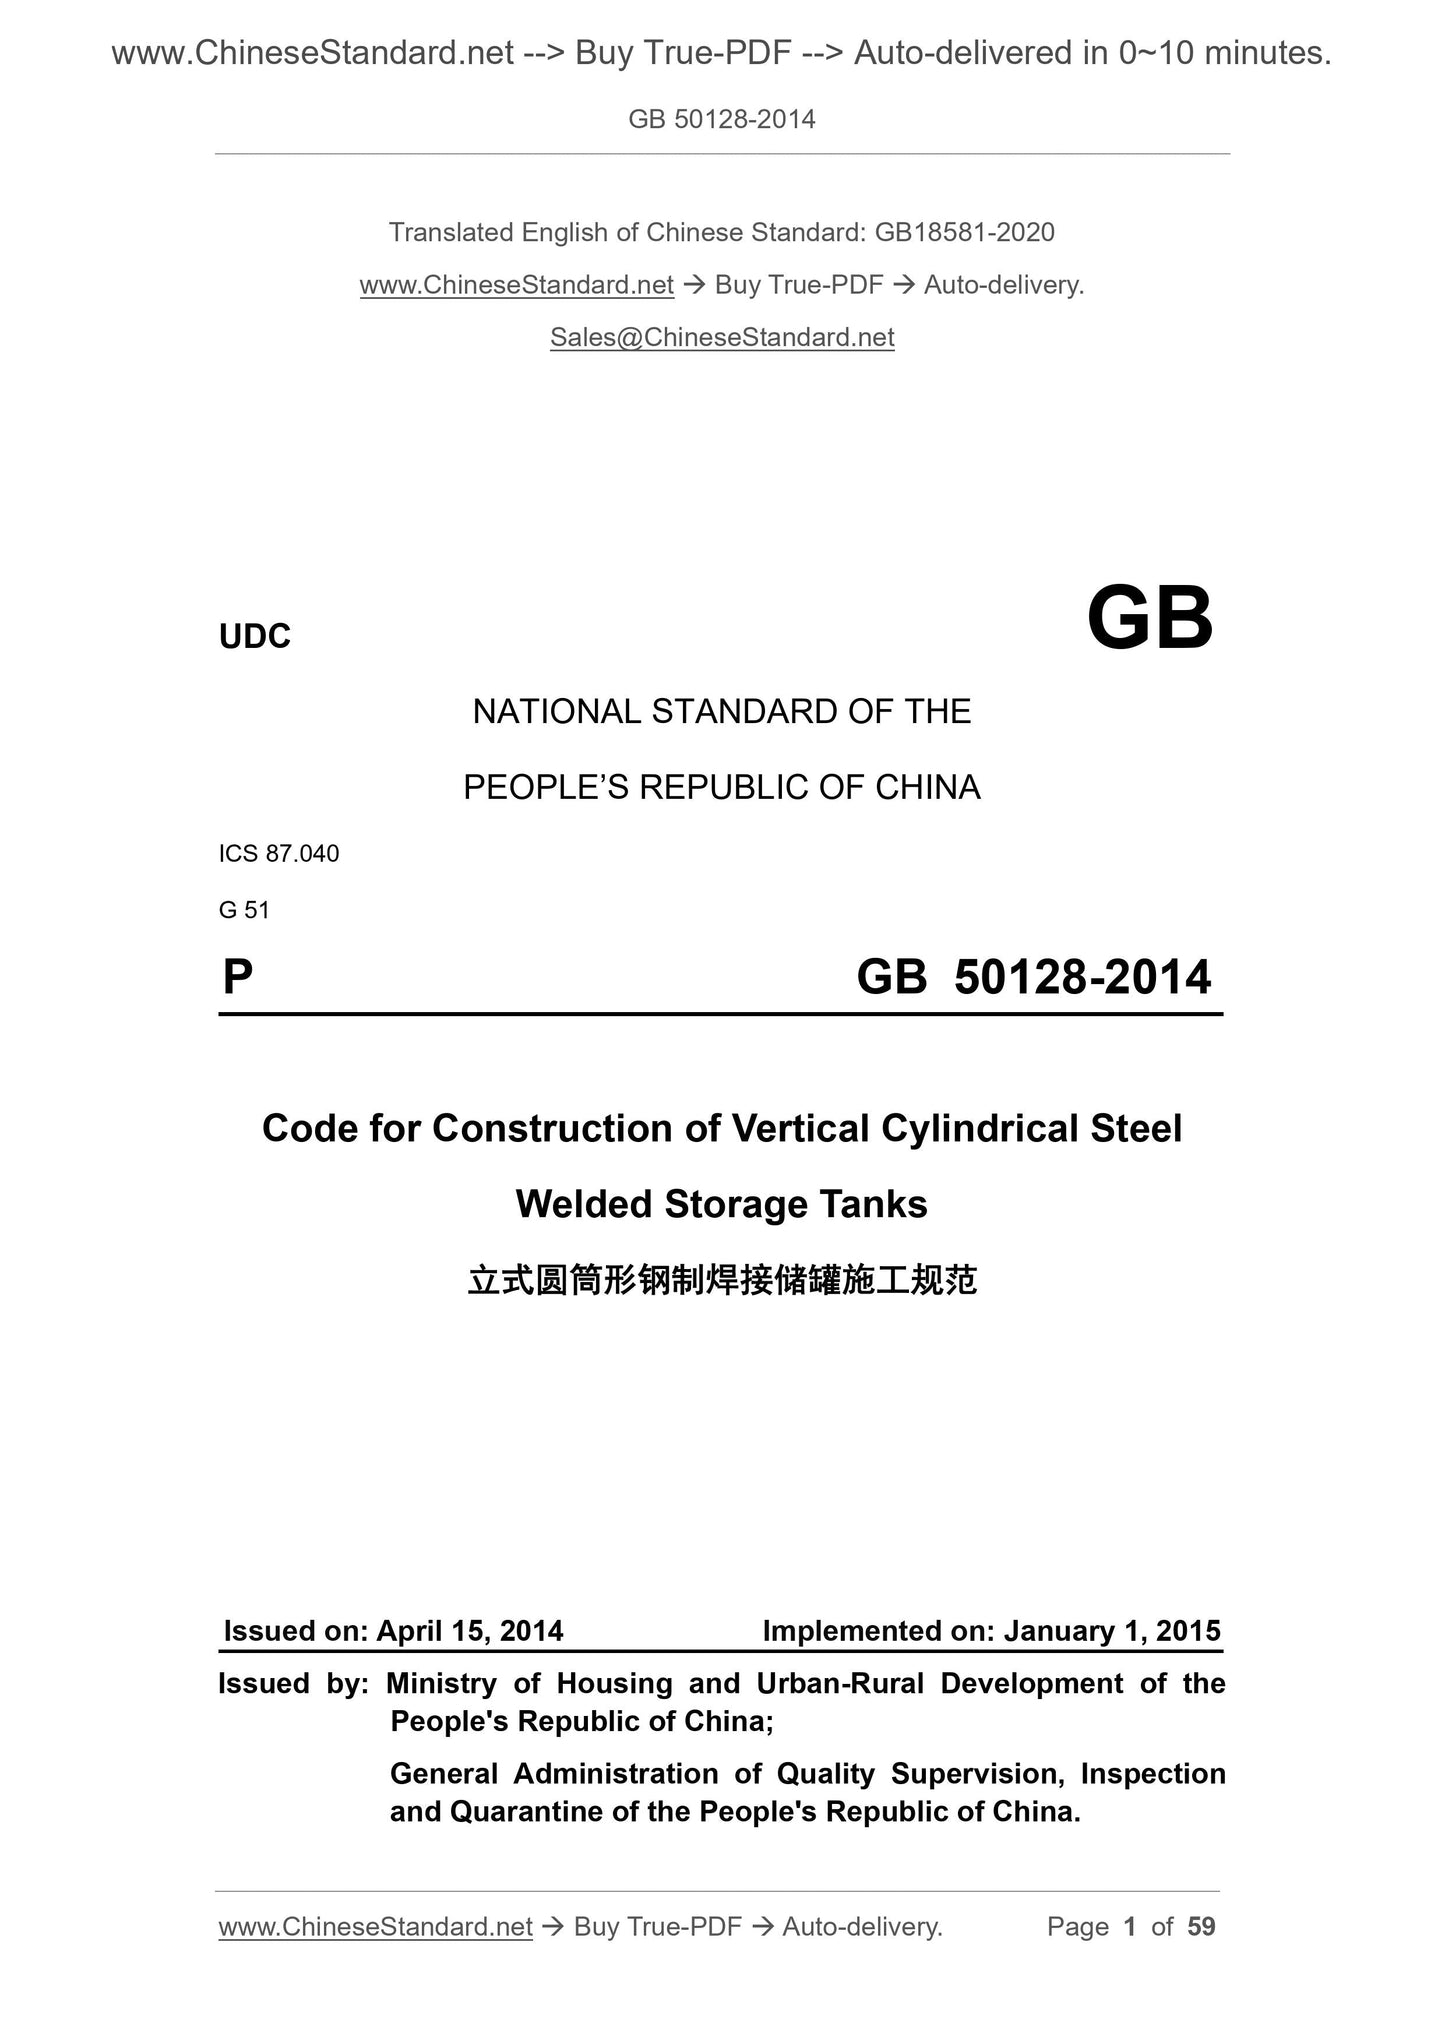 GB 50128-2014 Page 1